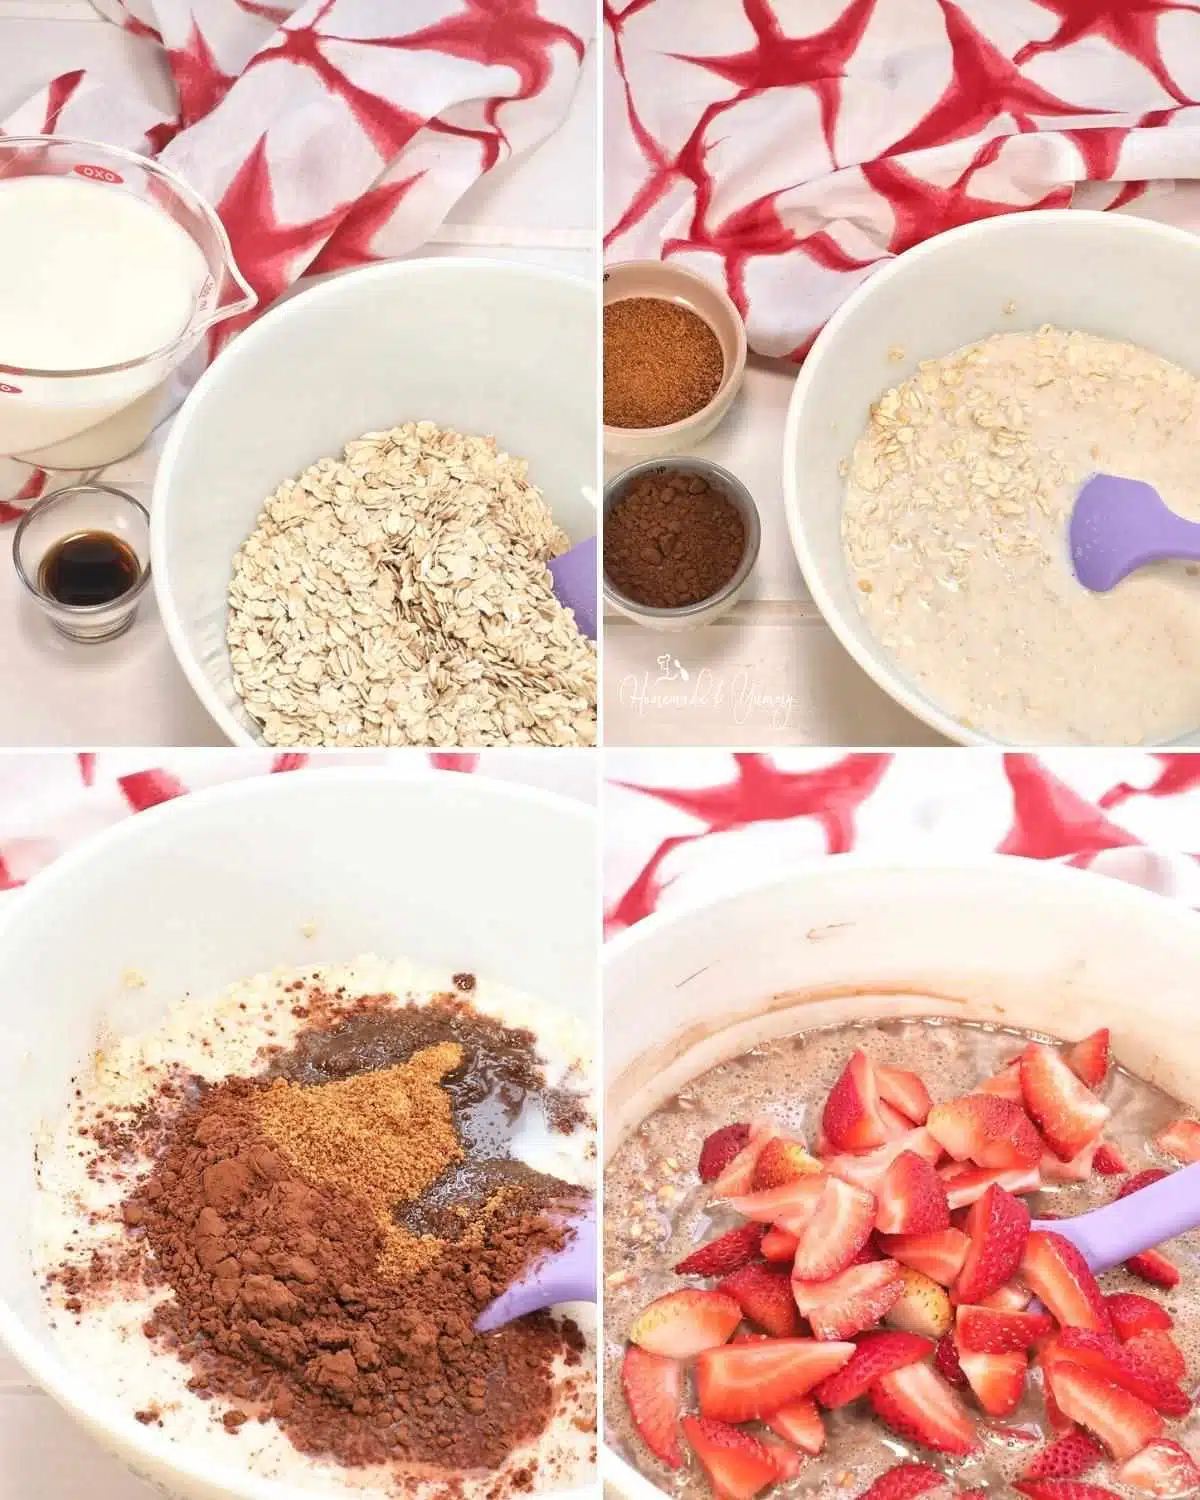 Mixing the baked strawberry and chocolate oatmeal in a bowl.